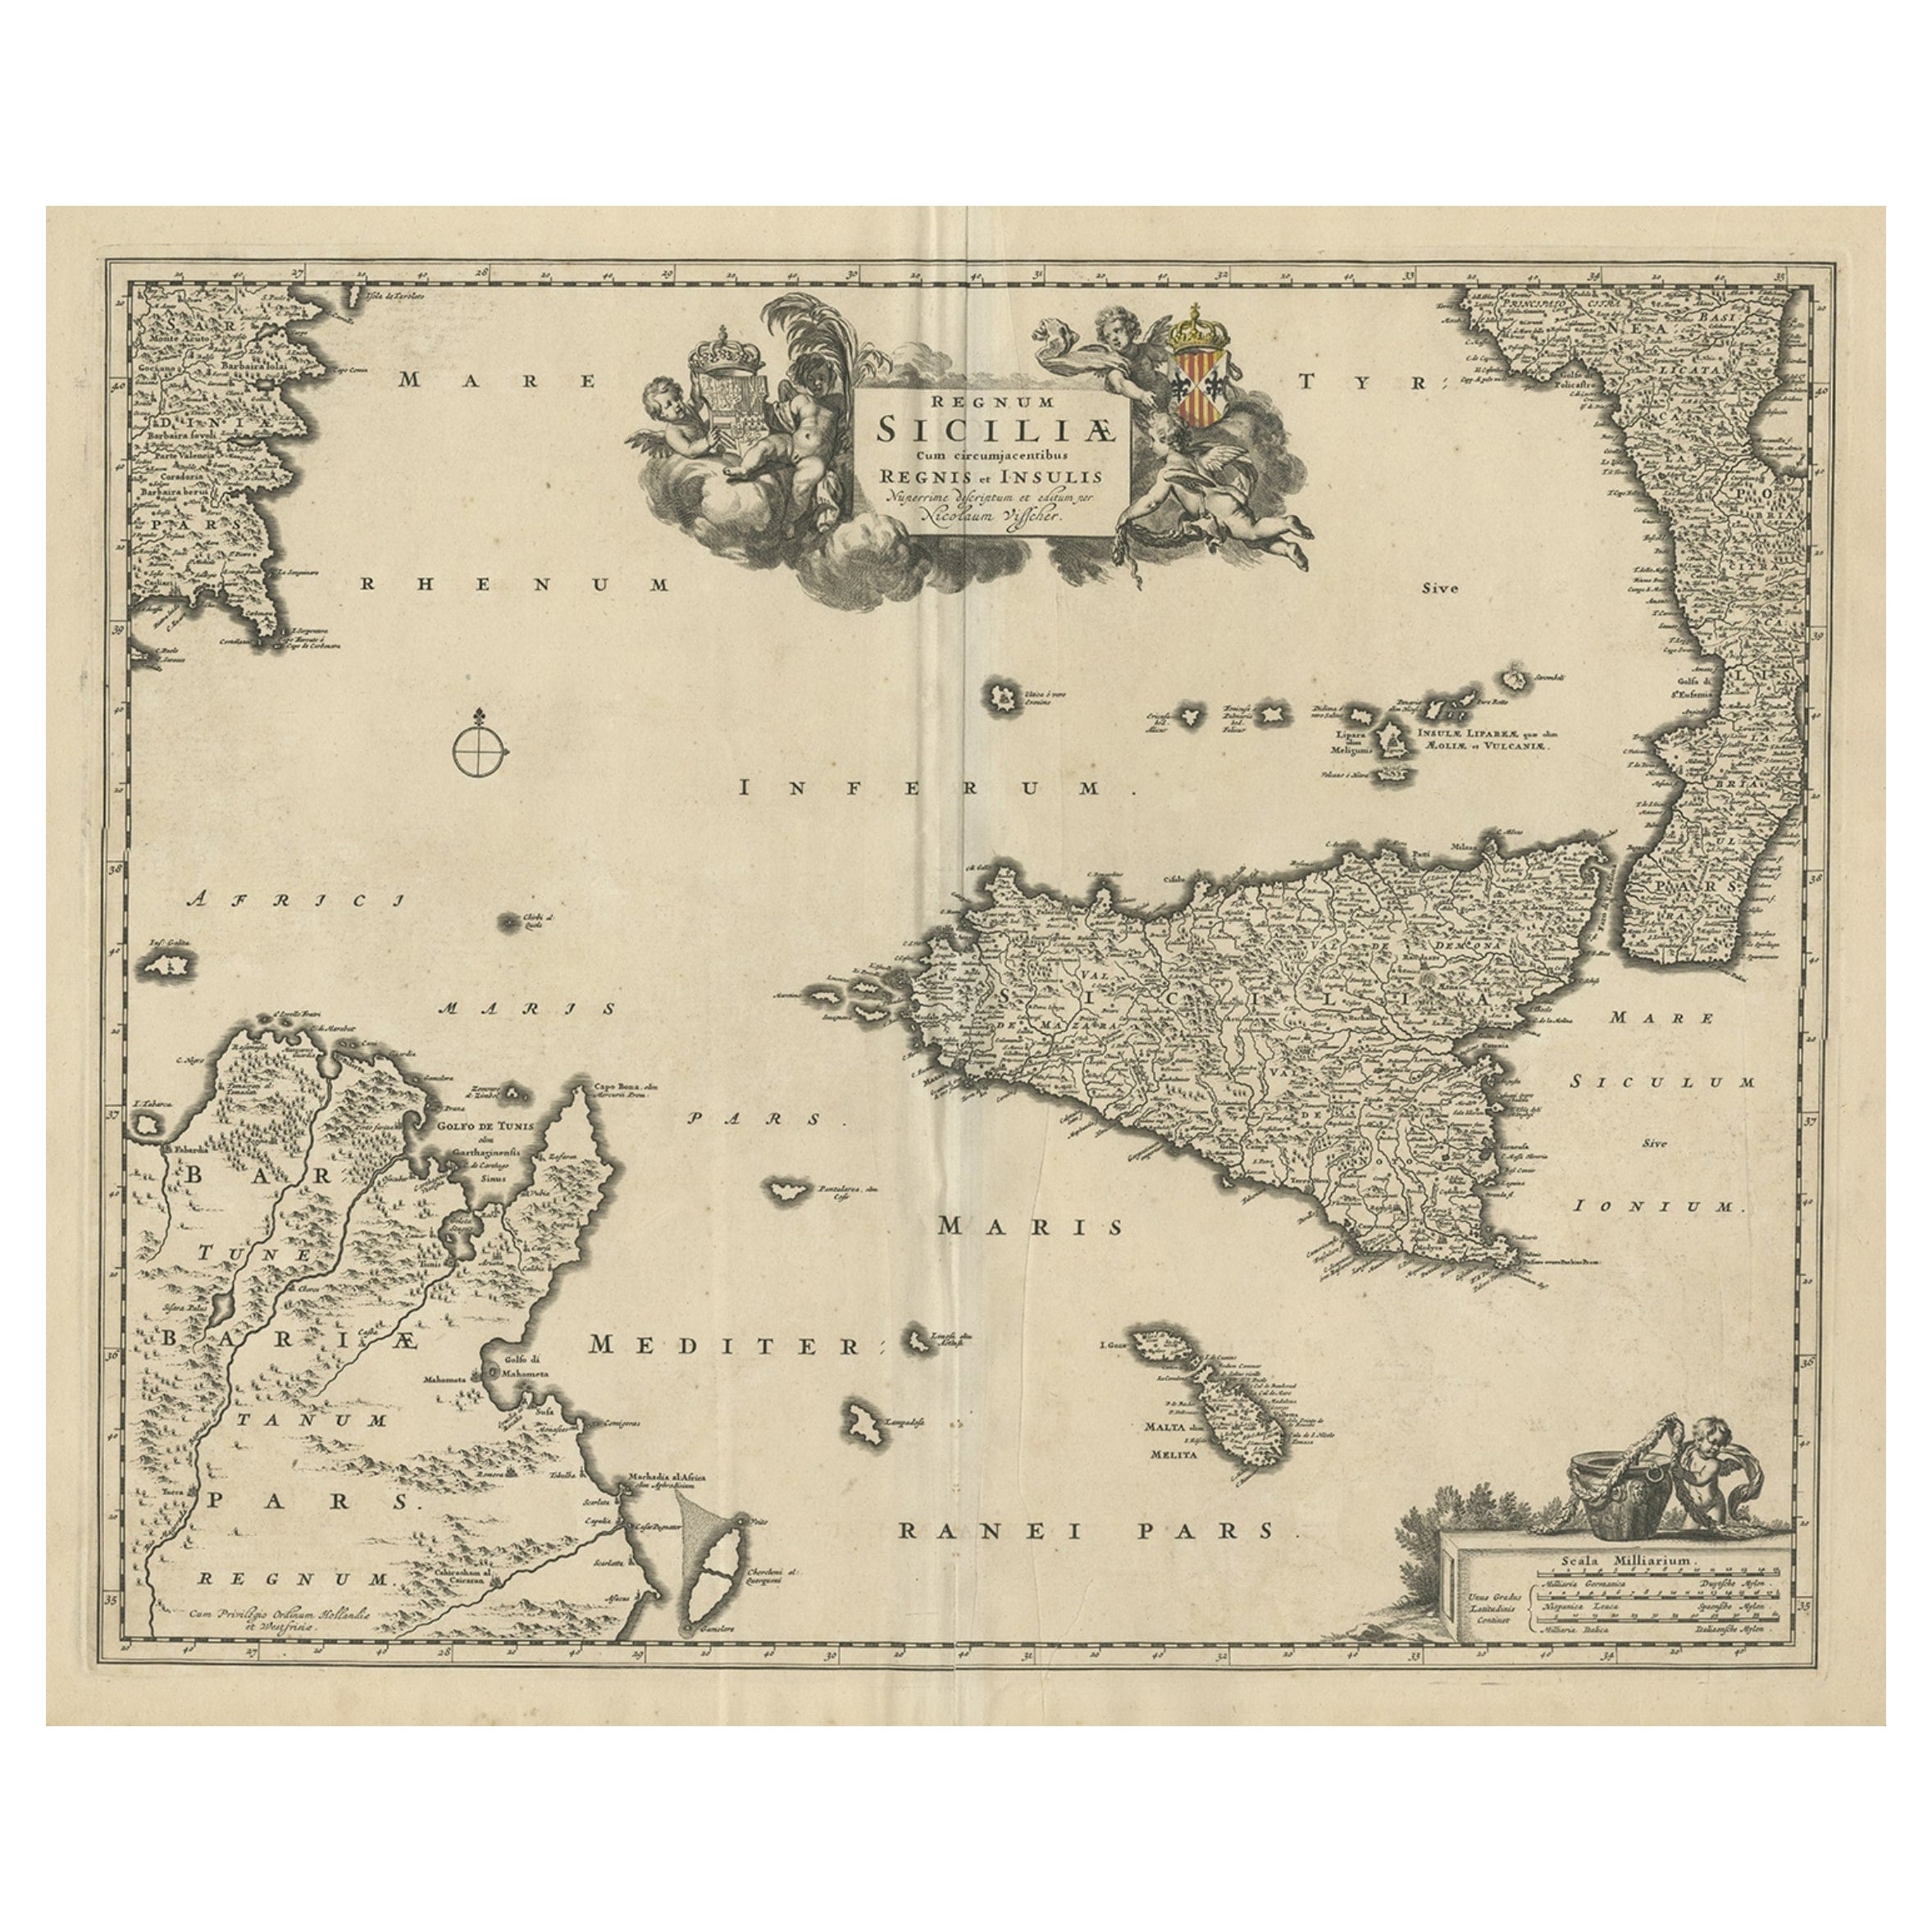 Decorative Map of Sicily, Malta and a Bit of Naples and Sardinia 'Italy', c.1680